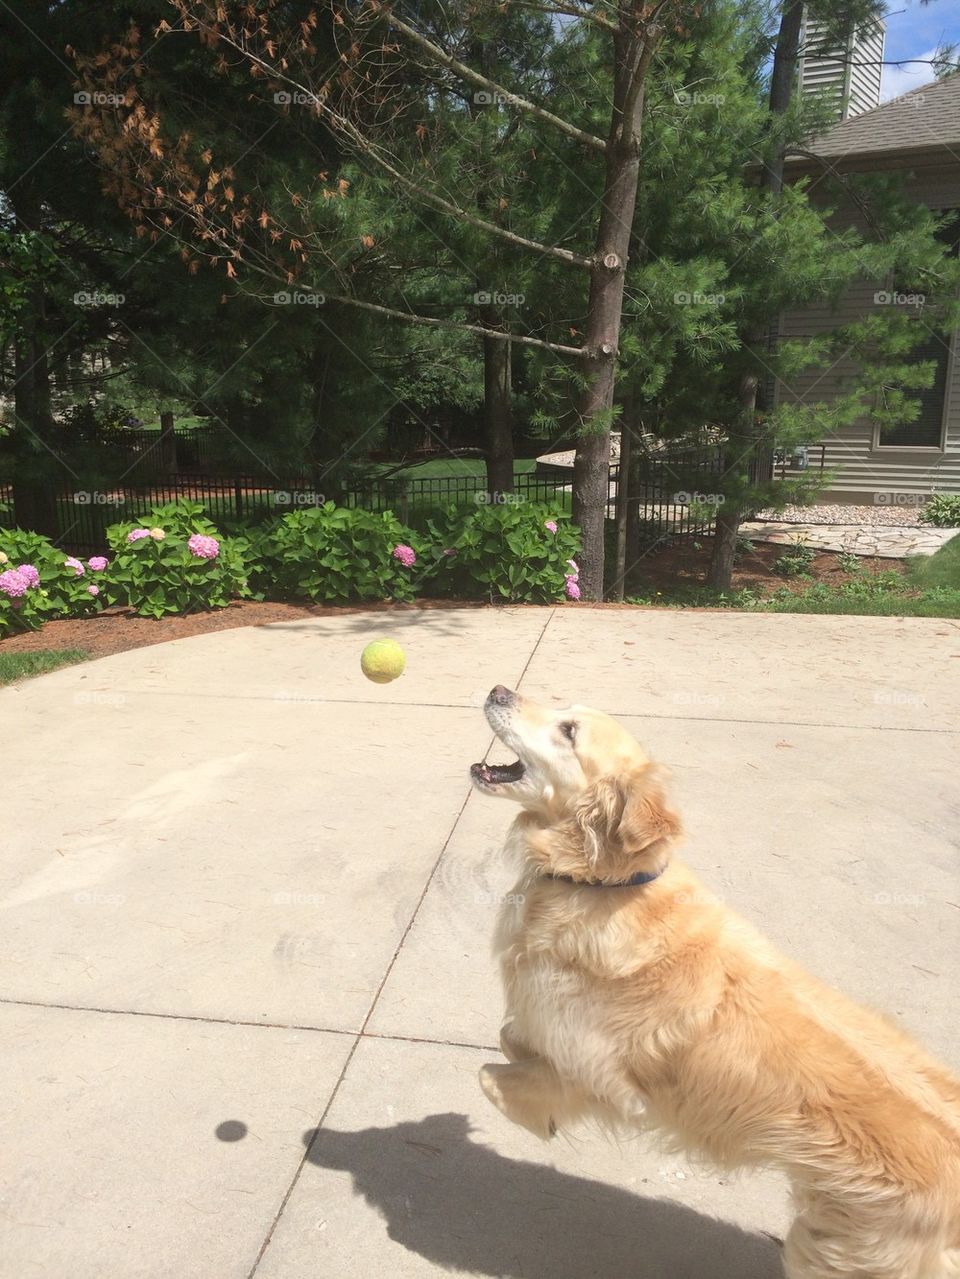 Playing catch with dog